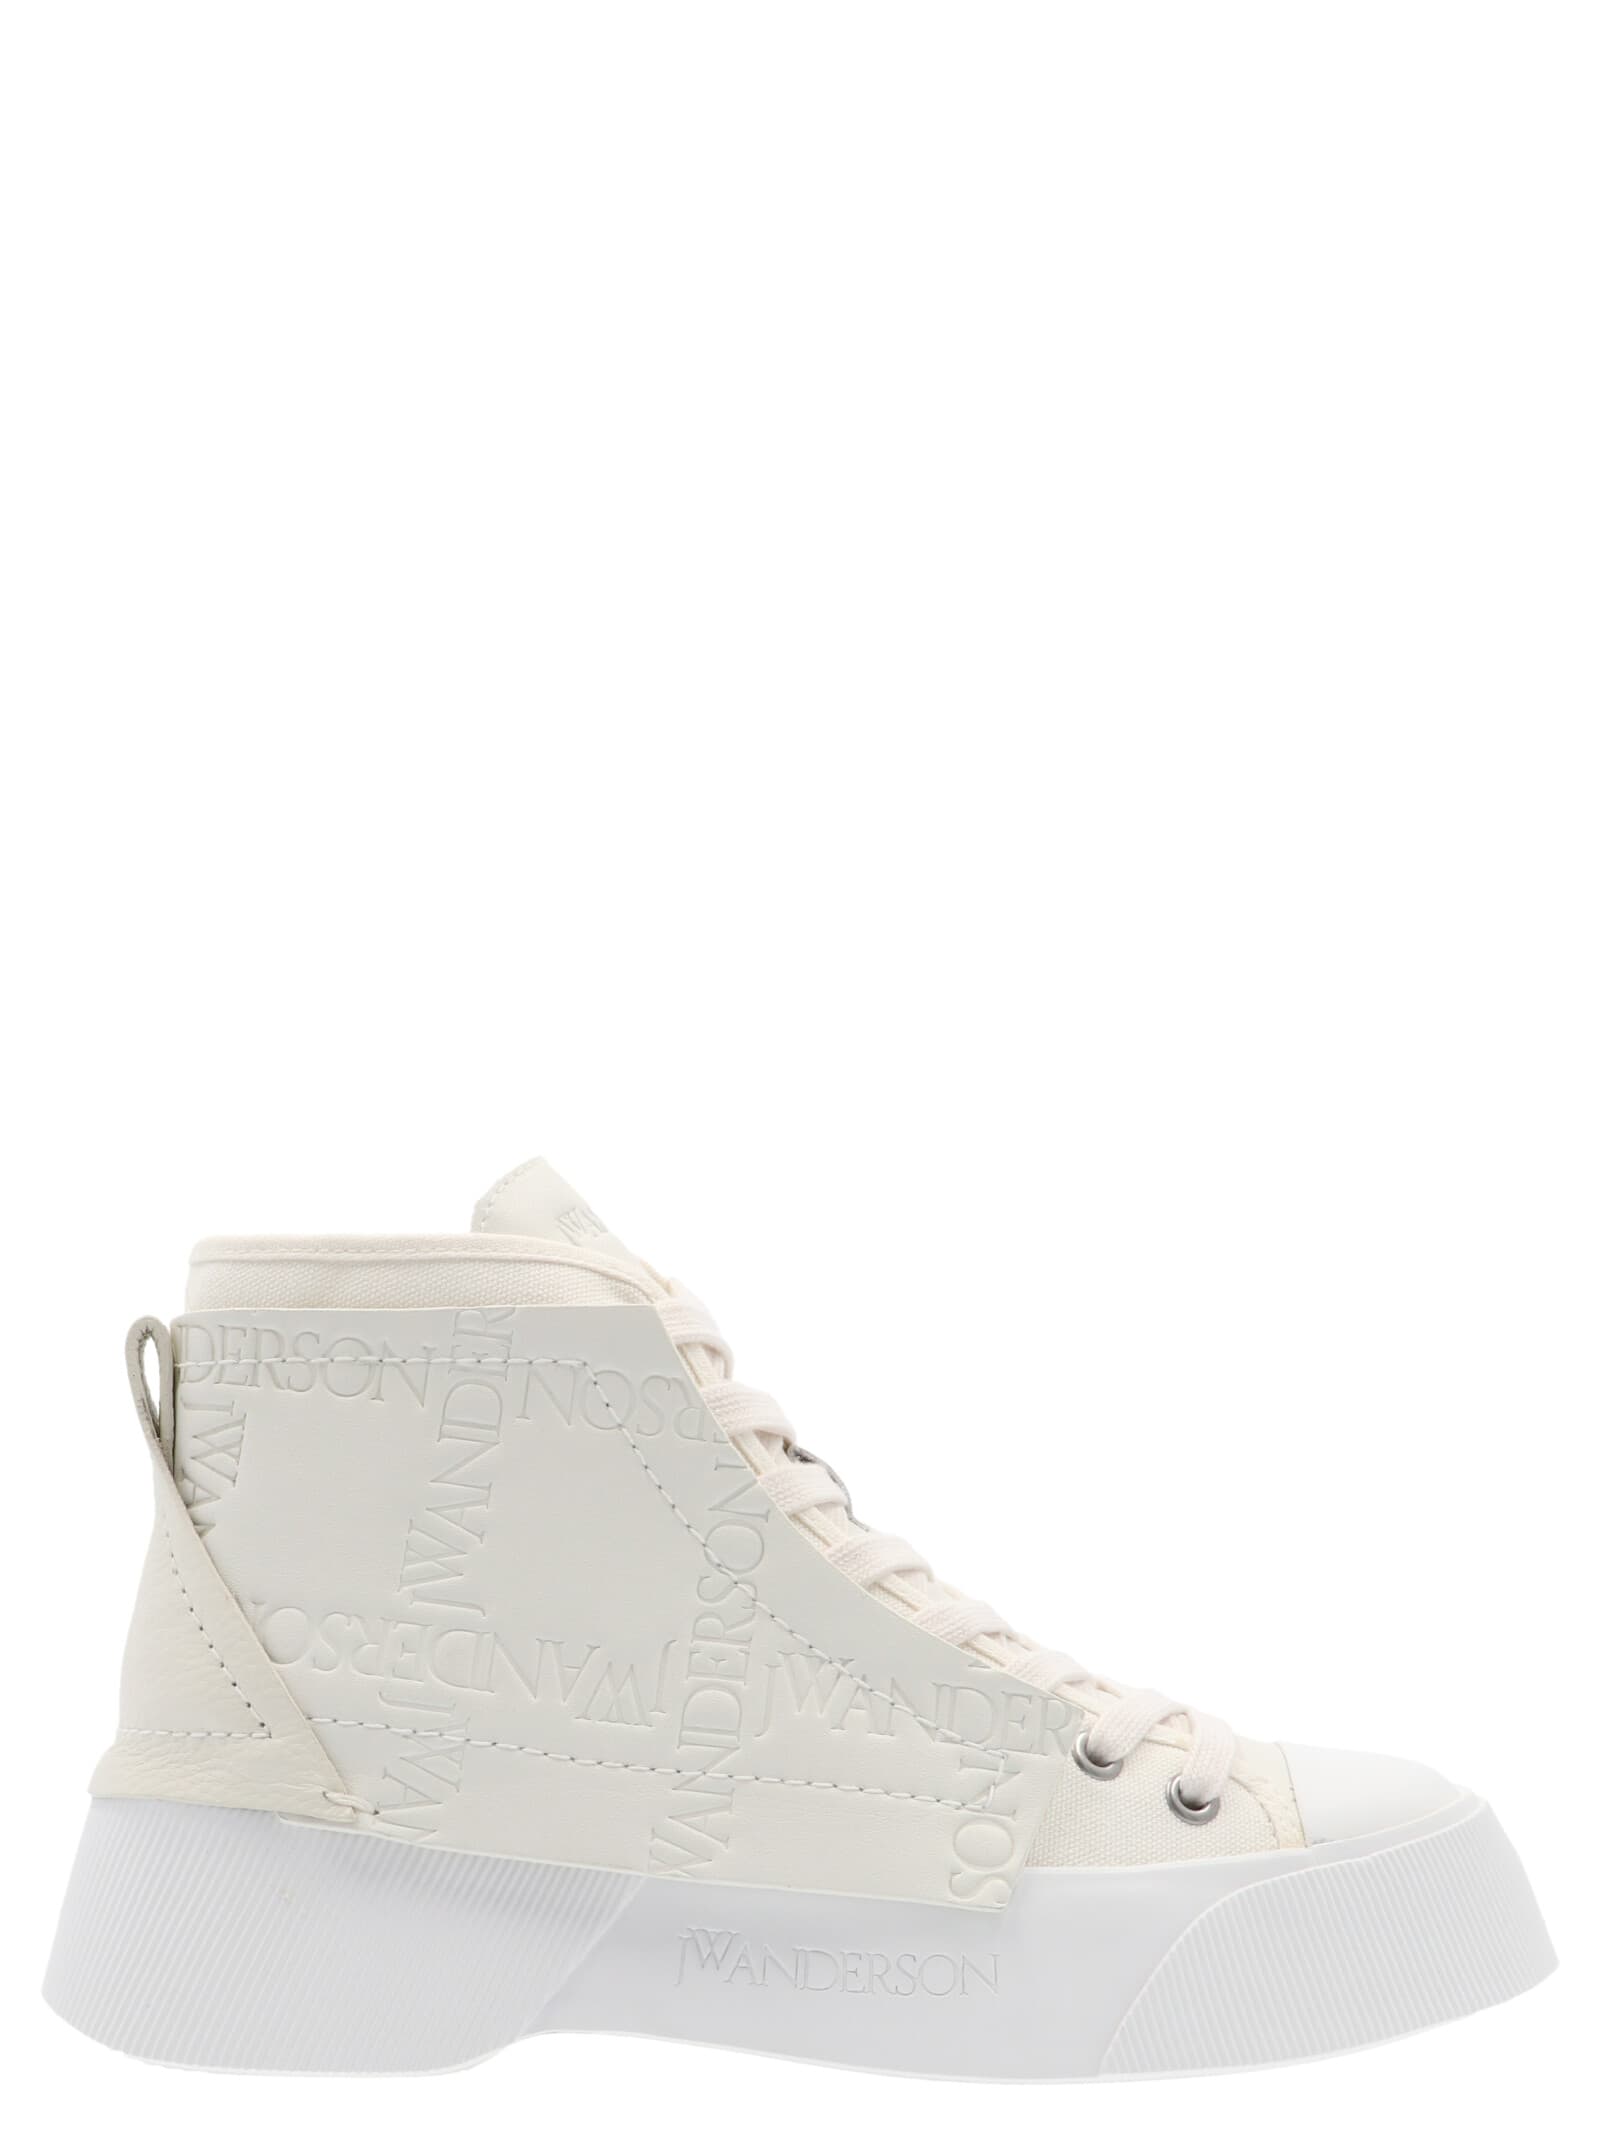 J.W. Anderson trainer High Top Sneakers